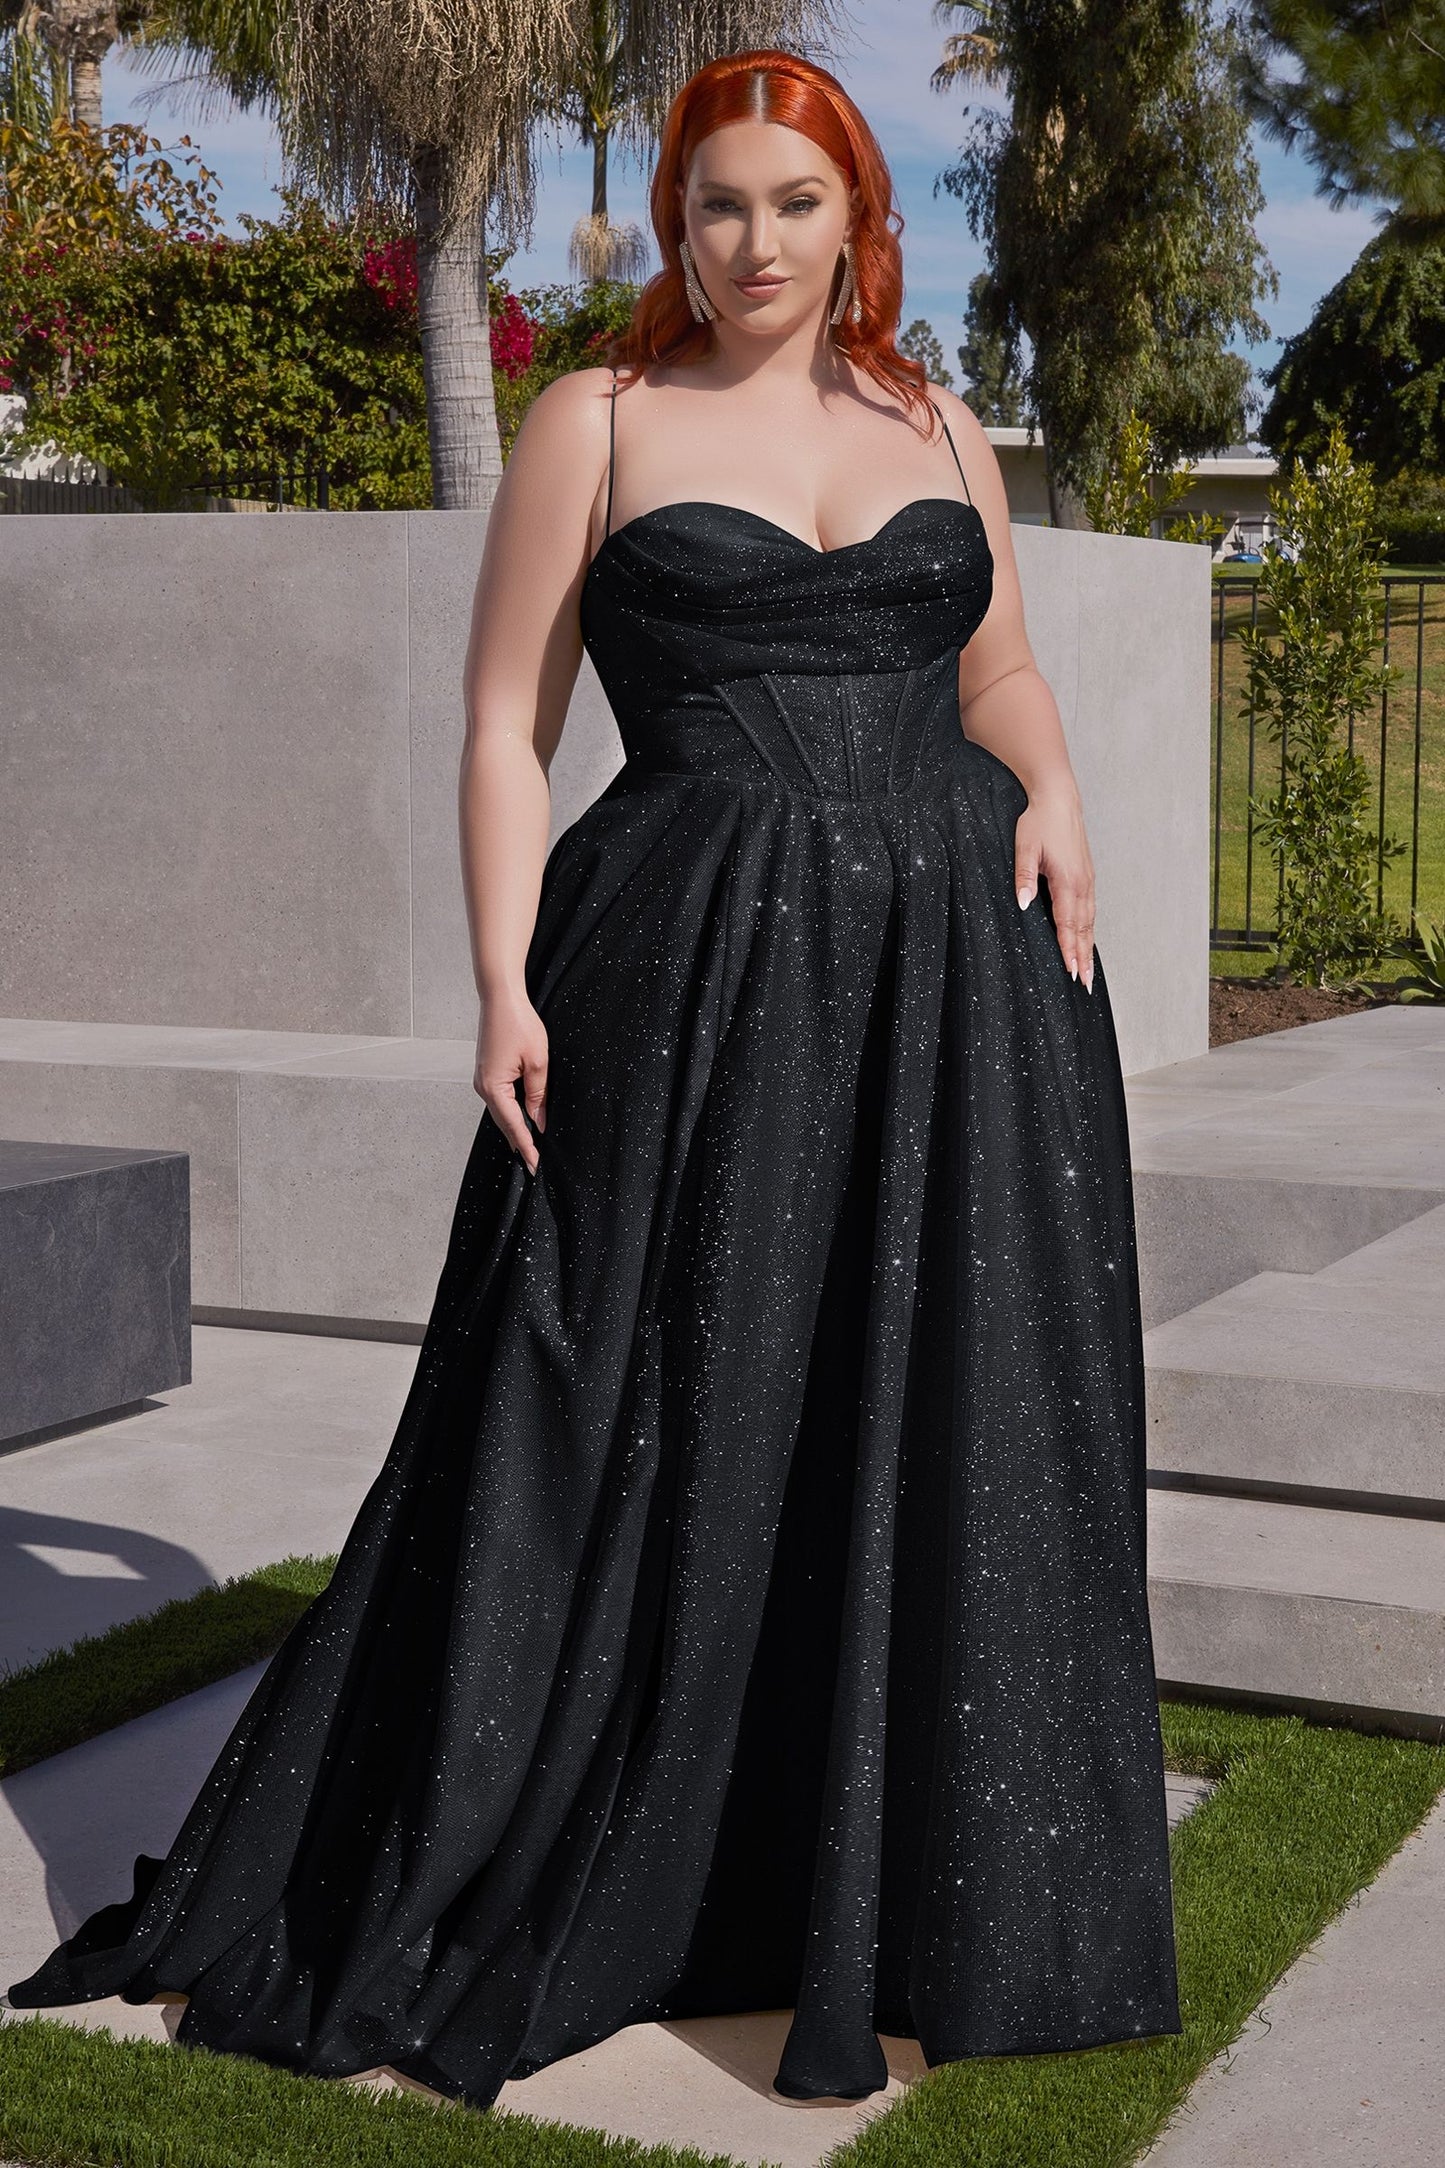 Shining Brighter Than Diamonds - Glamour Glitter Gown Plus Size